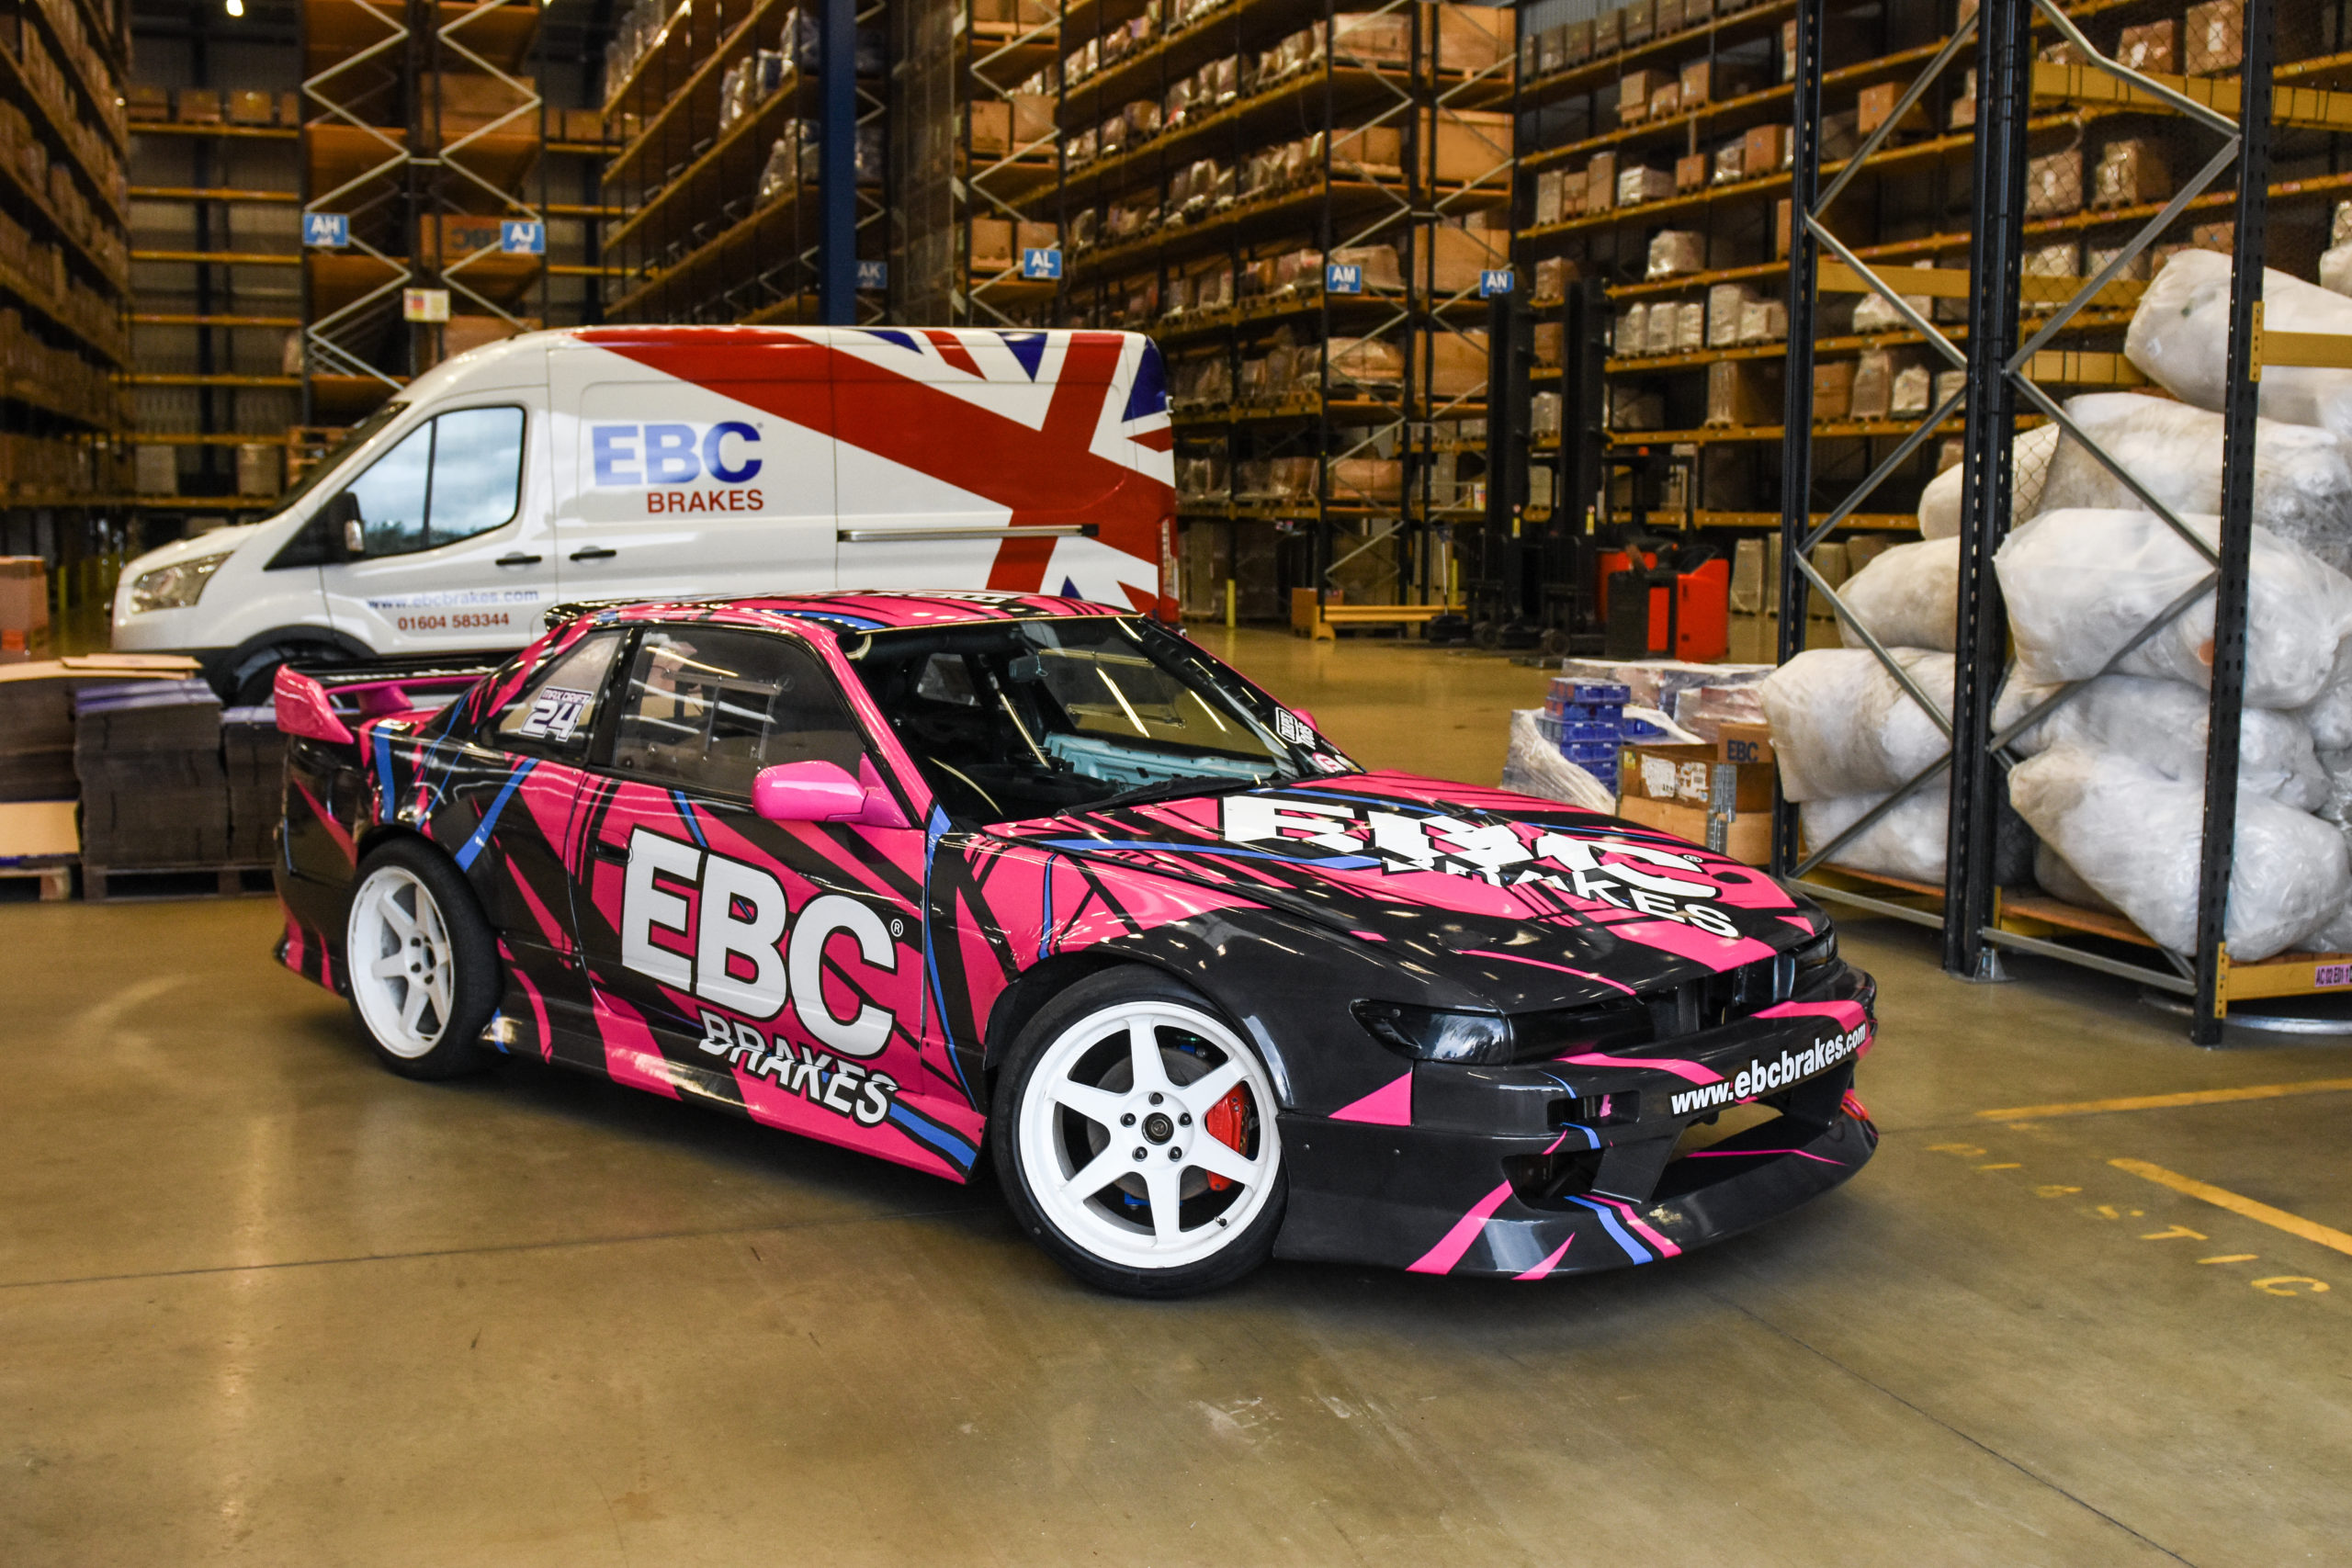 Drifter Max Cotton’s All-New EBC Brakes Livery Unveiled for 2022 Season